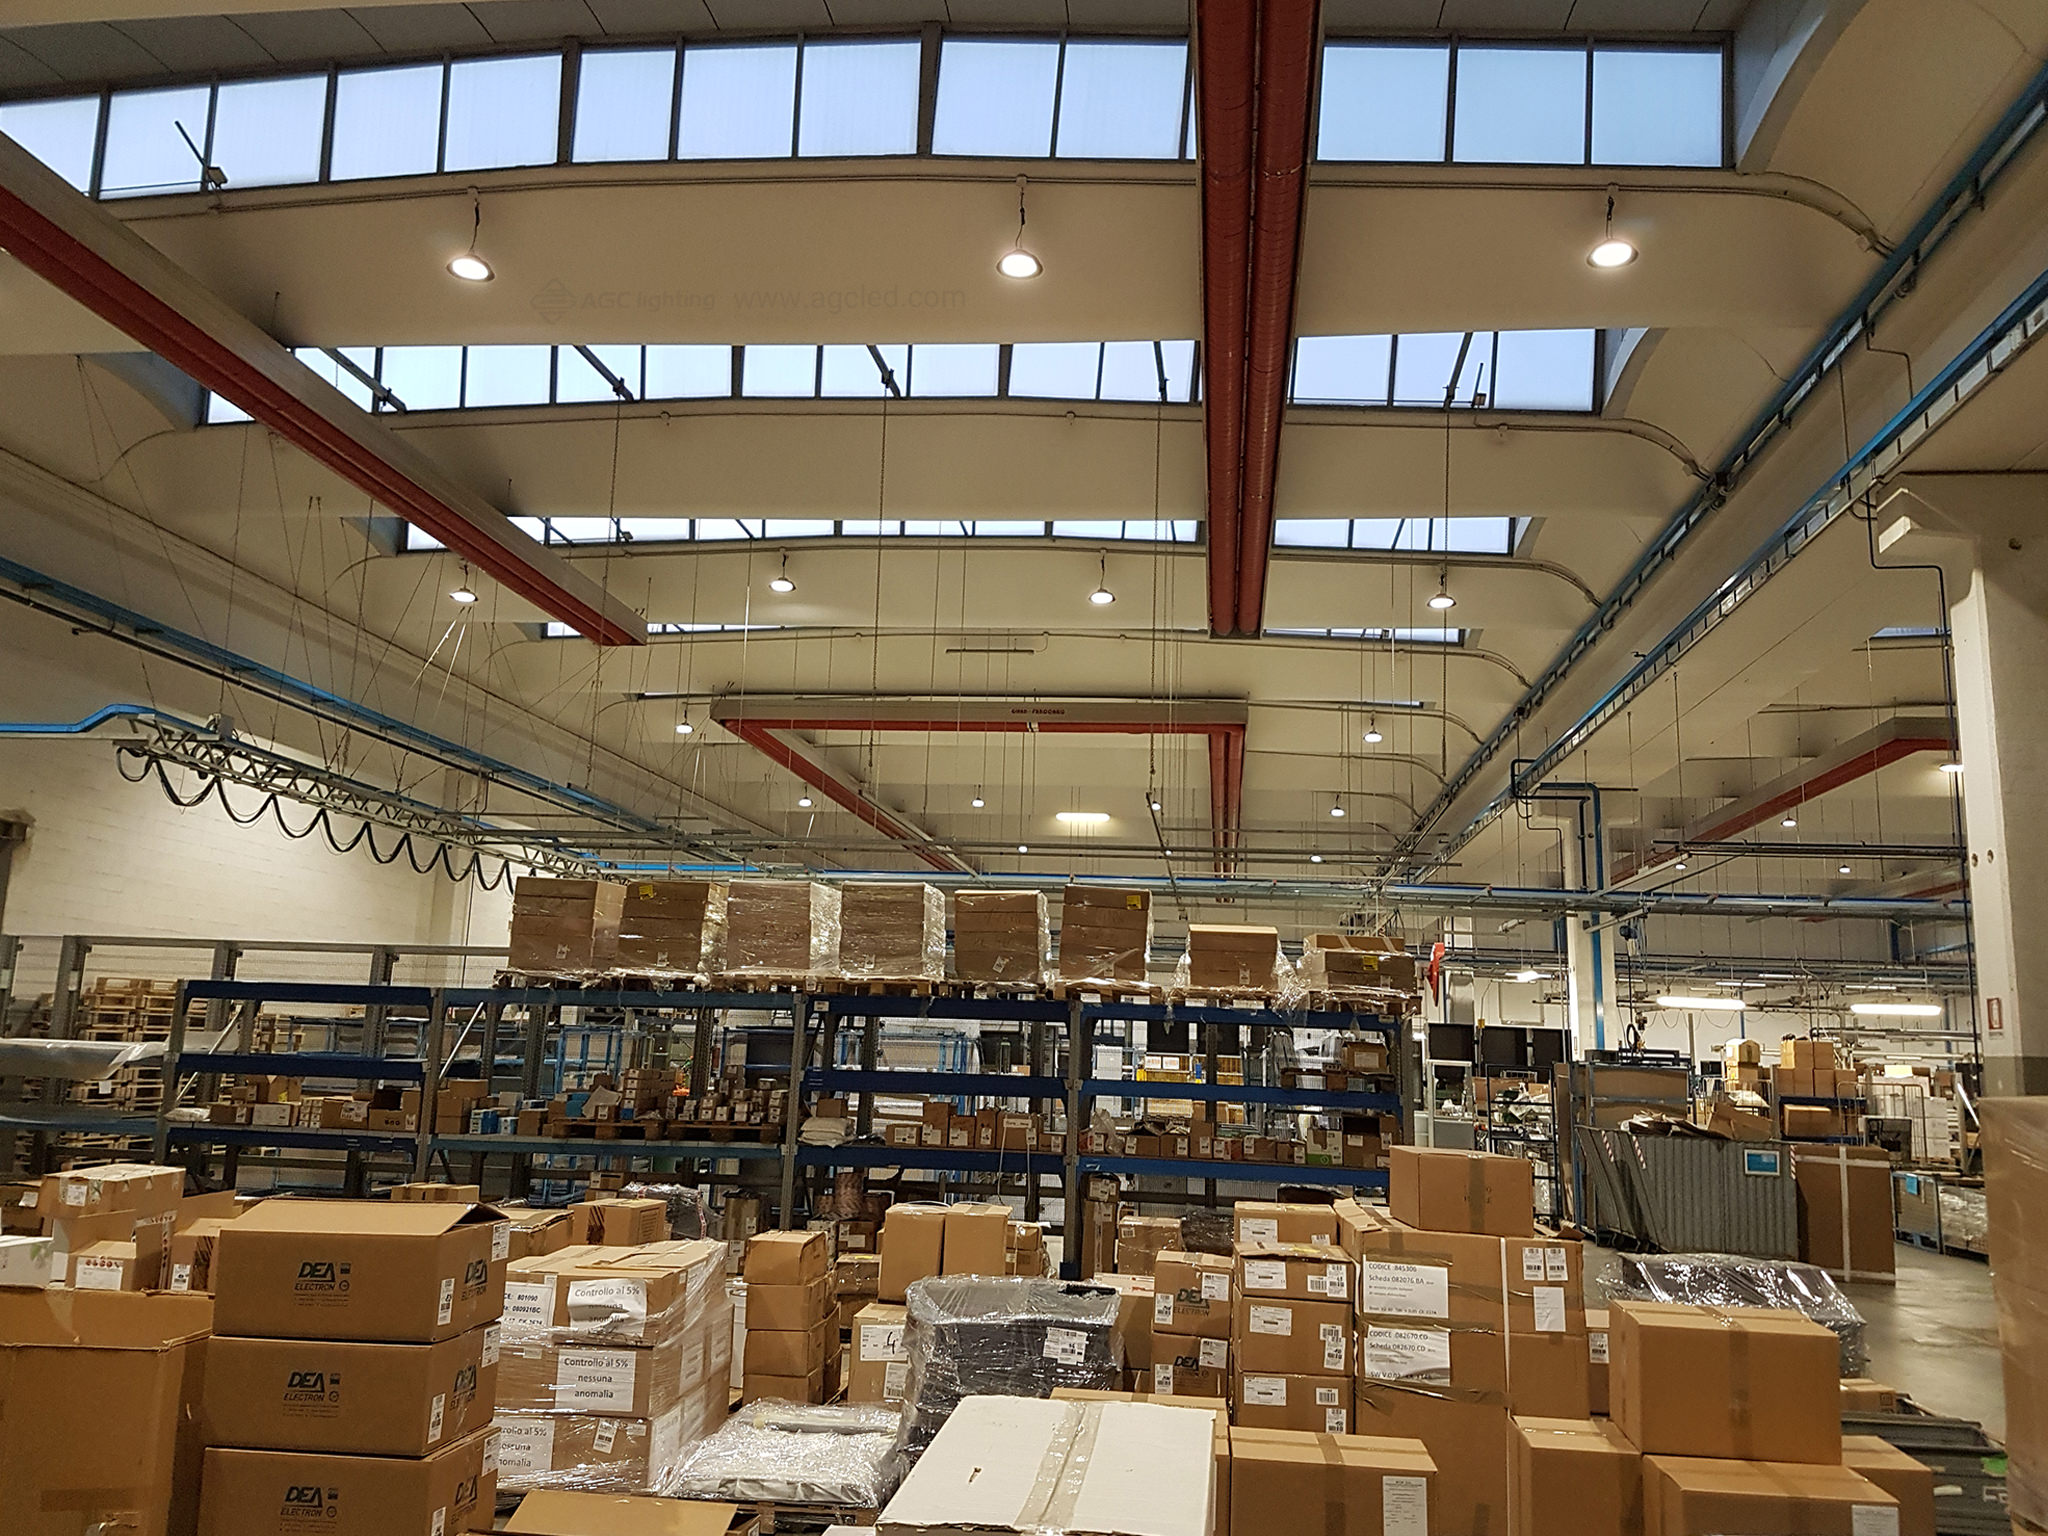 100pcs high bay light used in warehouse